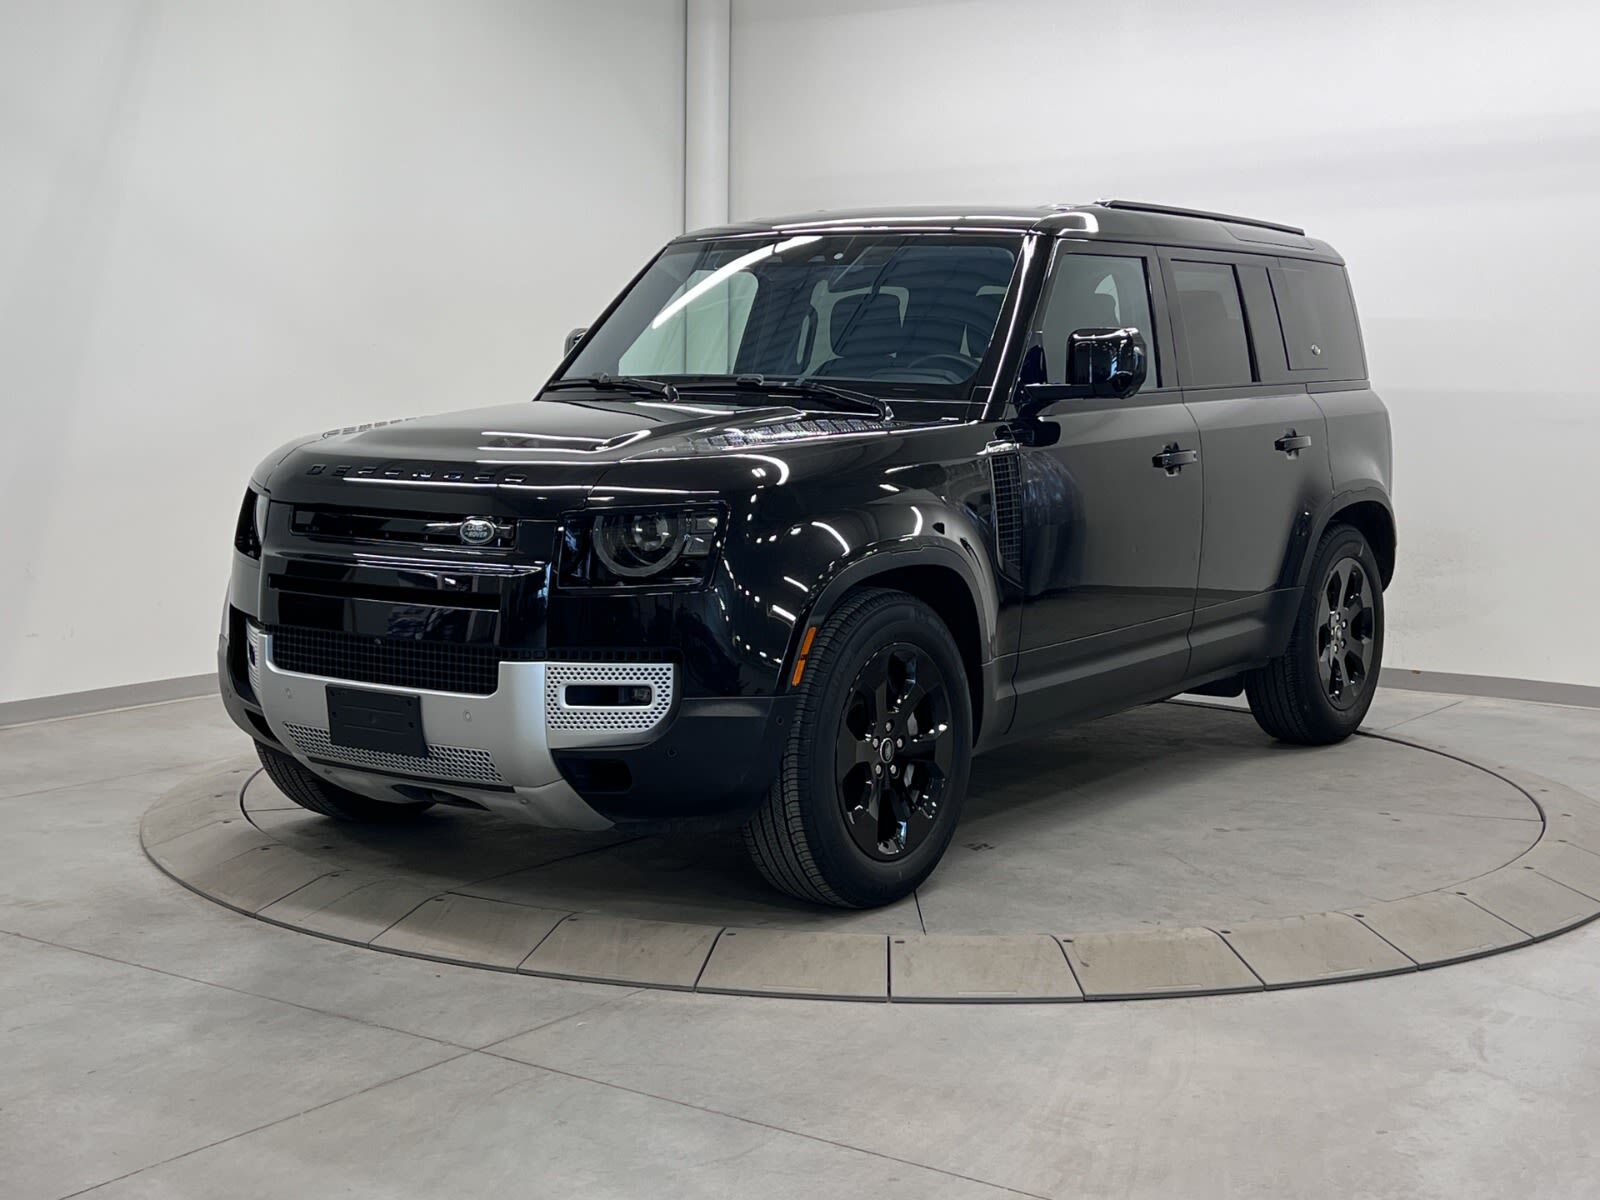 2020 Land Rover Defender CERTIFIED PRE OWNED RATES AS LOW AS 3.99%